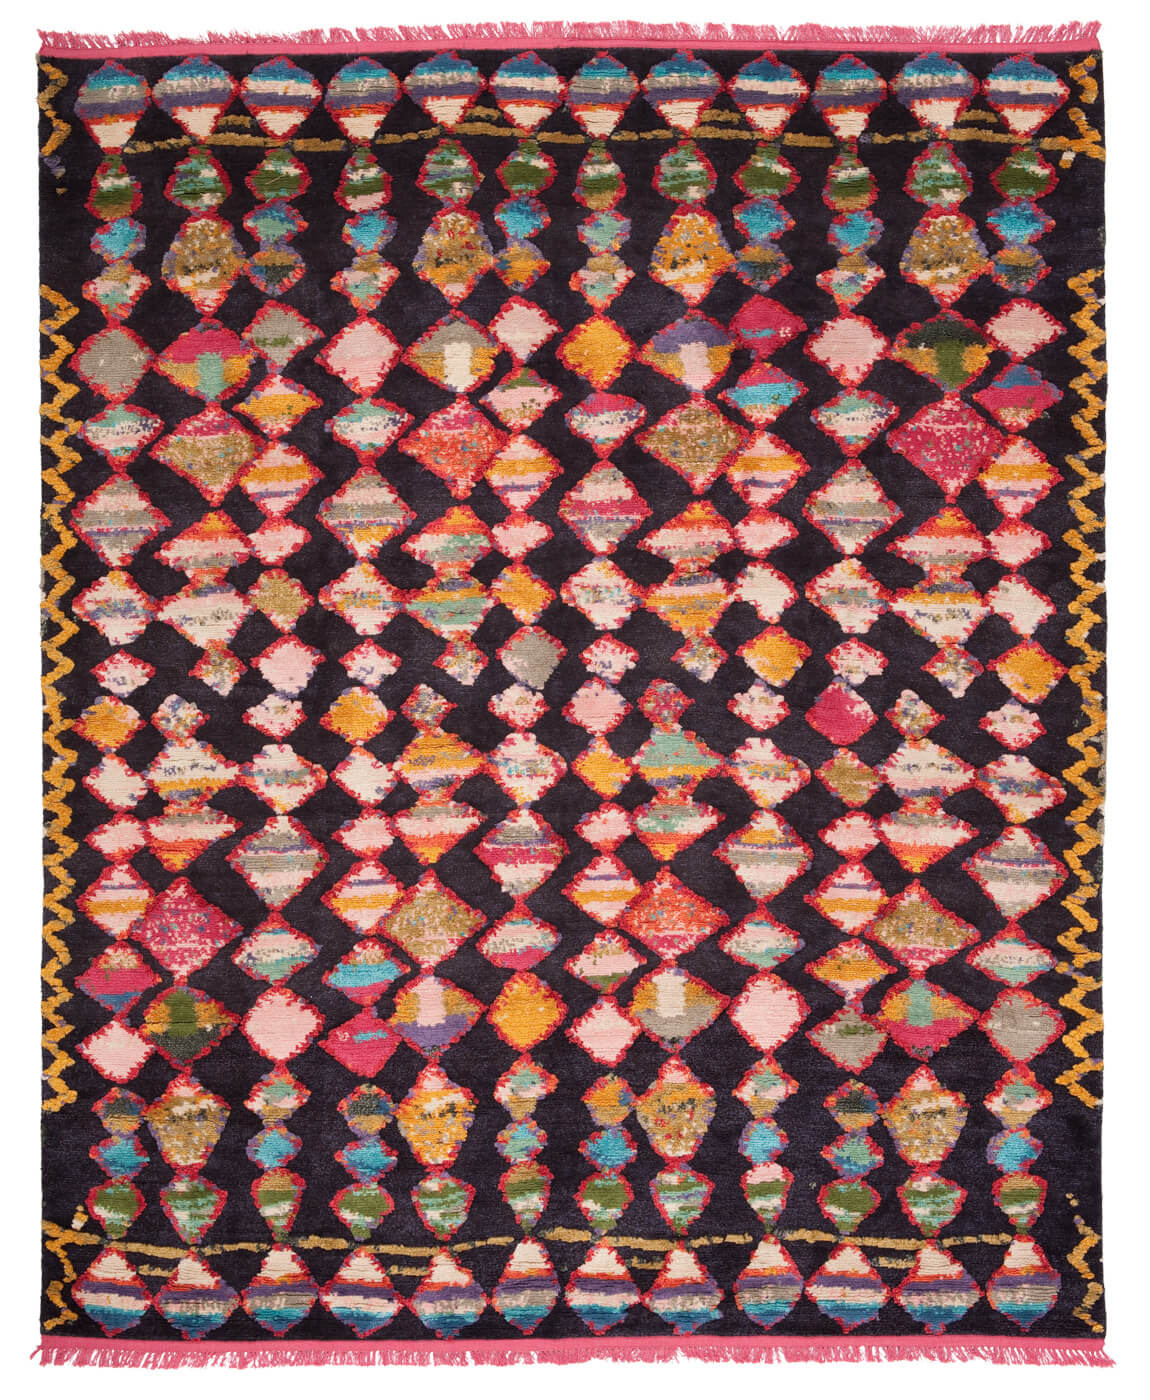 Luxurious Wool & Silk Hand-Woven Multicolored Rug